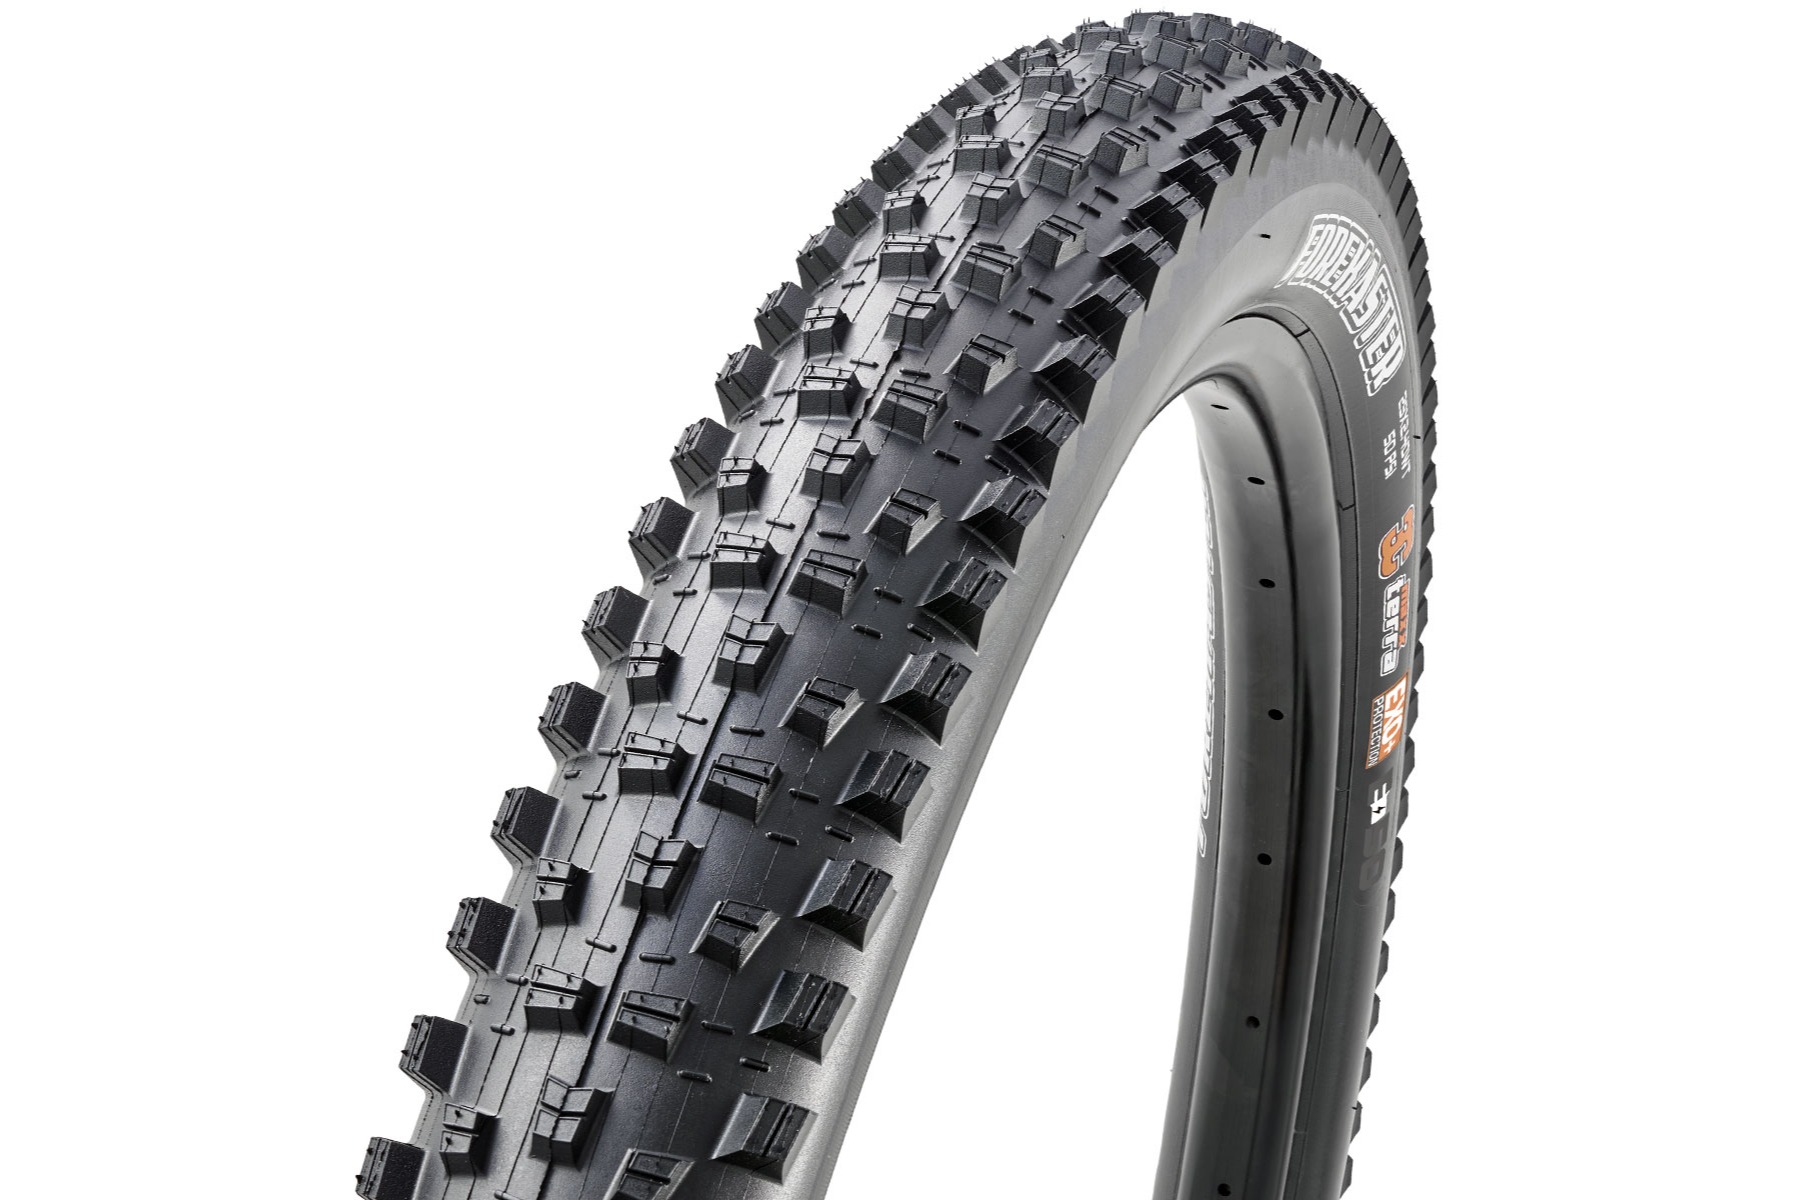 Maxxis Forekaster, Mountain Tire, 29''x2.40, Folding, Tubeless Ready, Dual, EXO, Wide Trail, 60TPI, Black